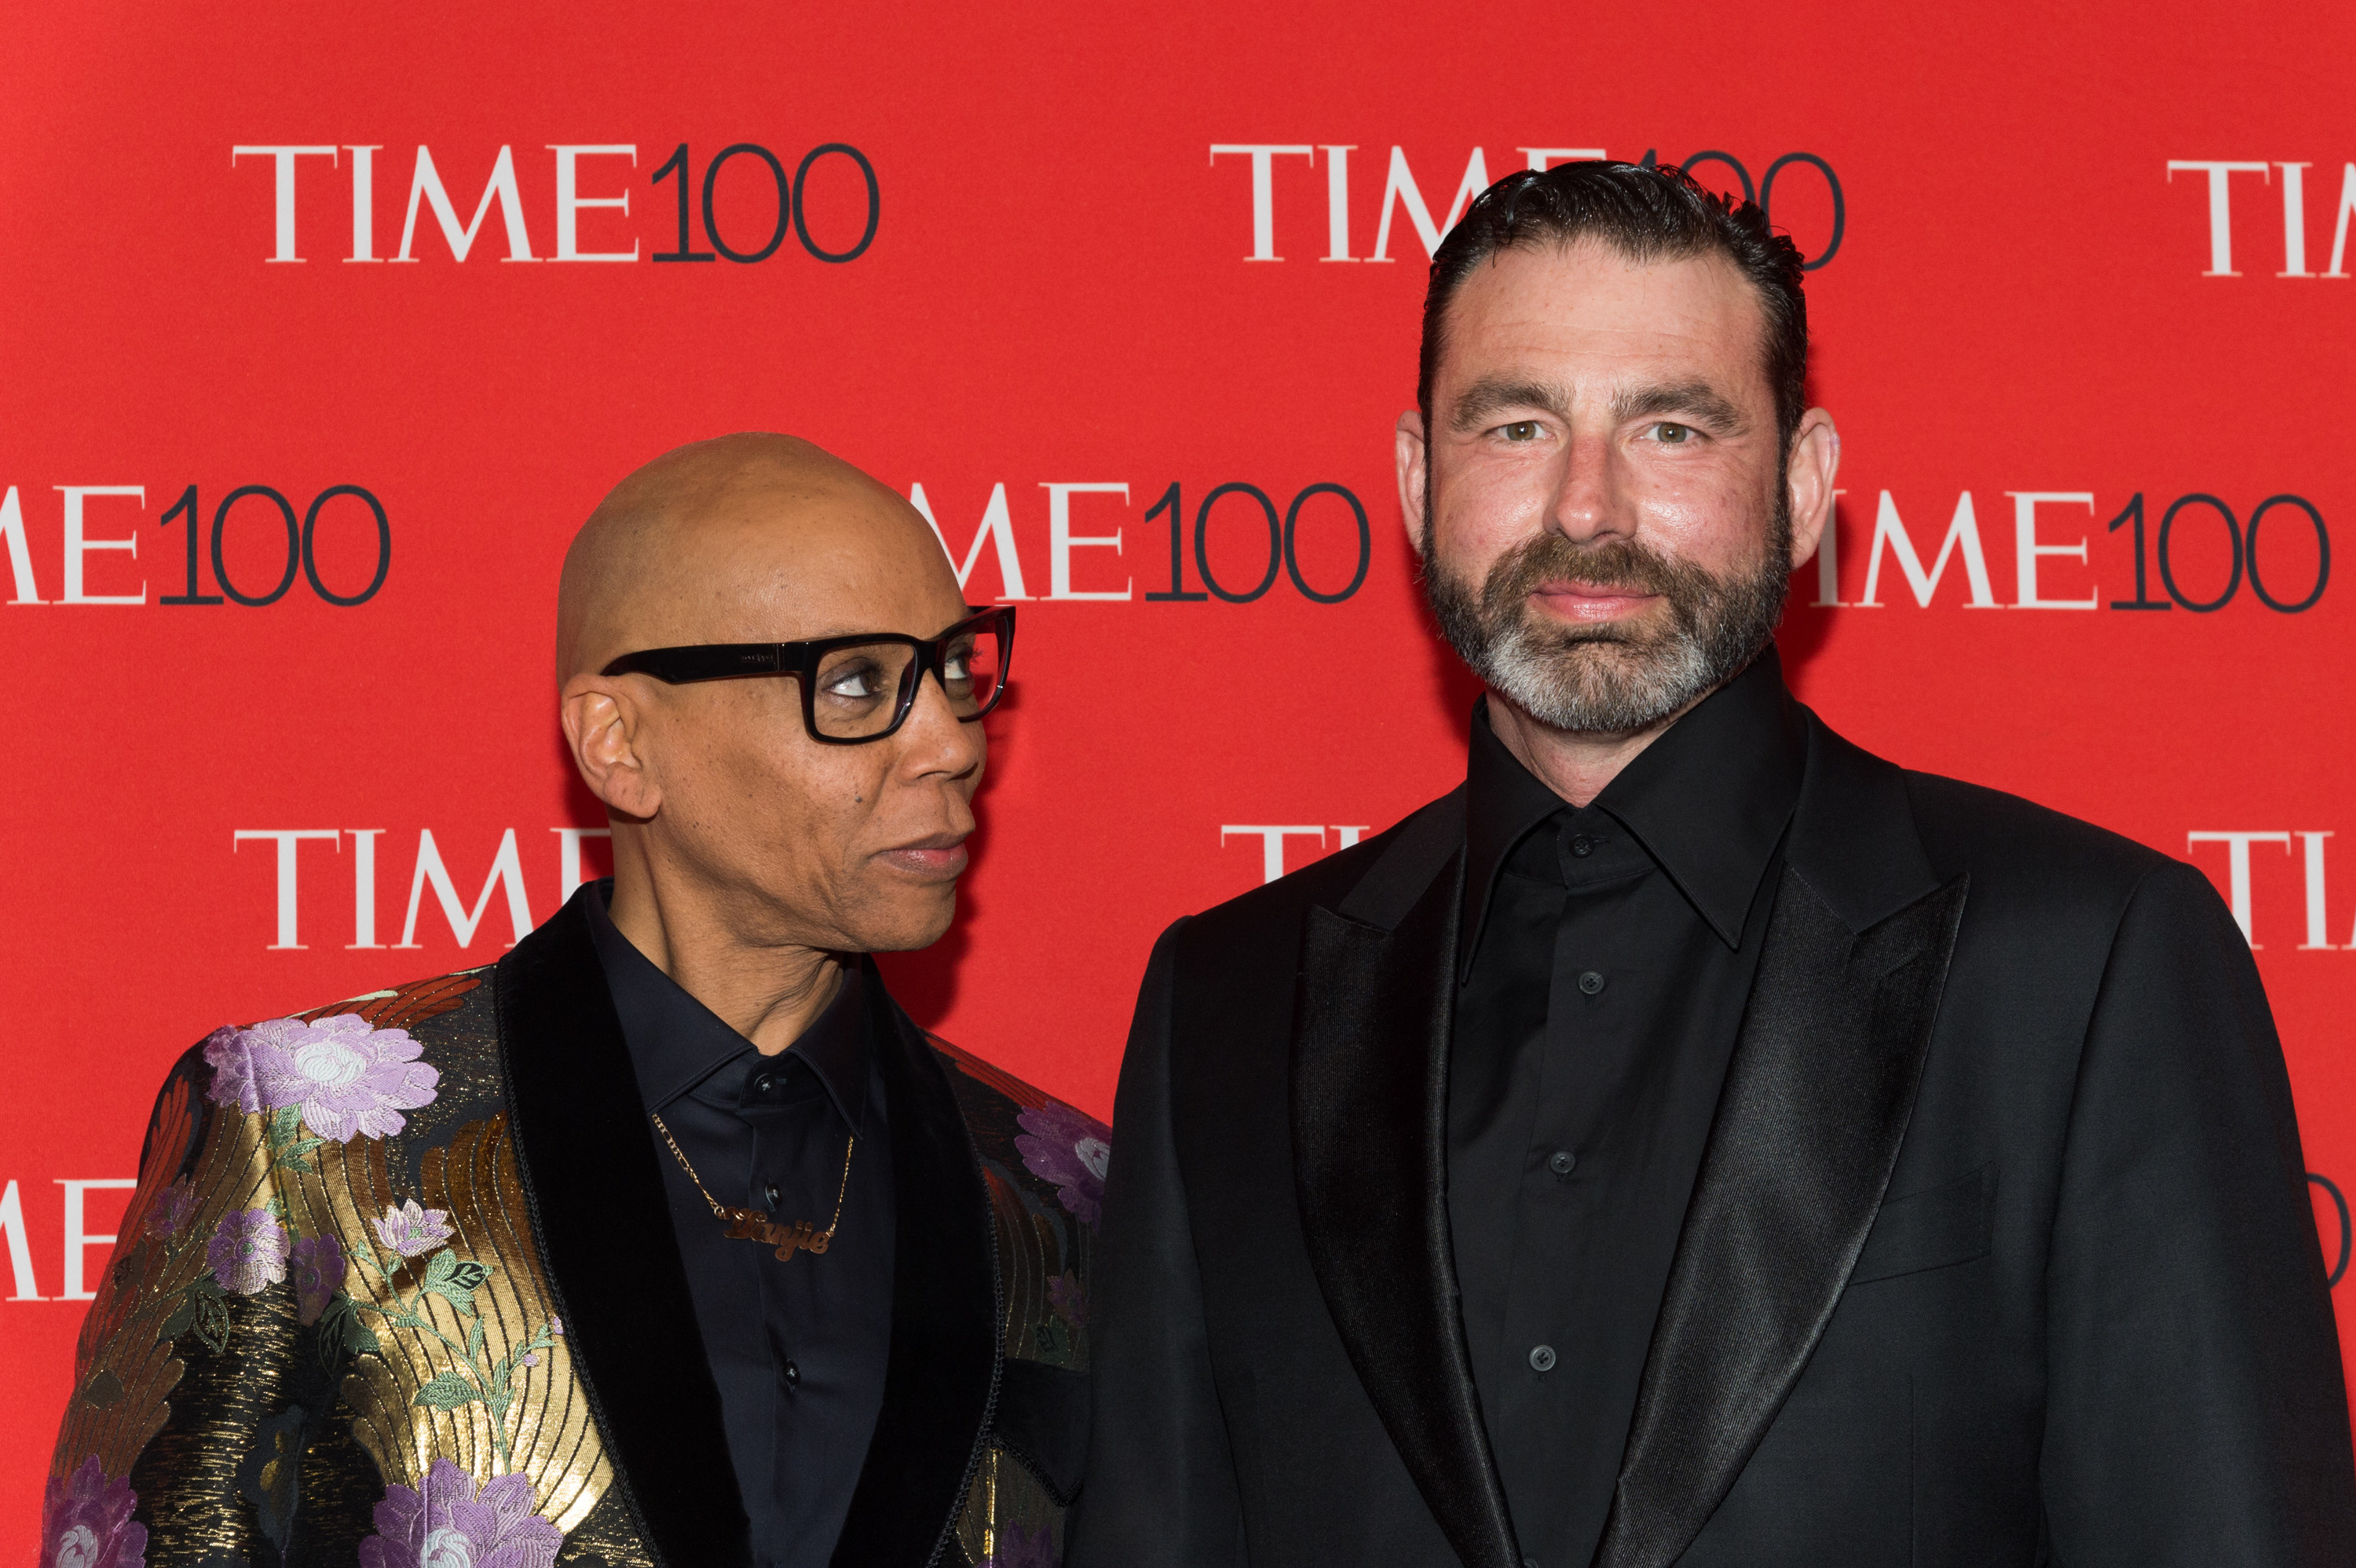 RuPaul and Georges LeBar at a Time 100 event